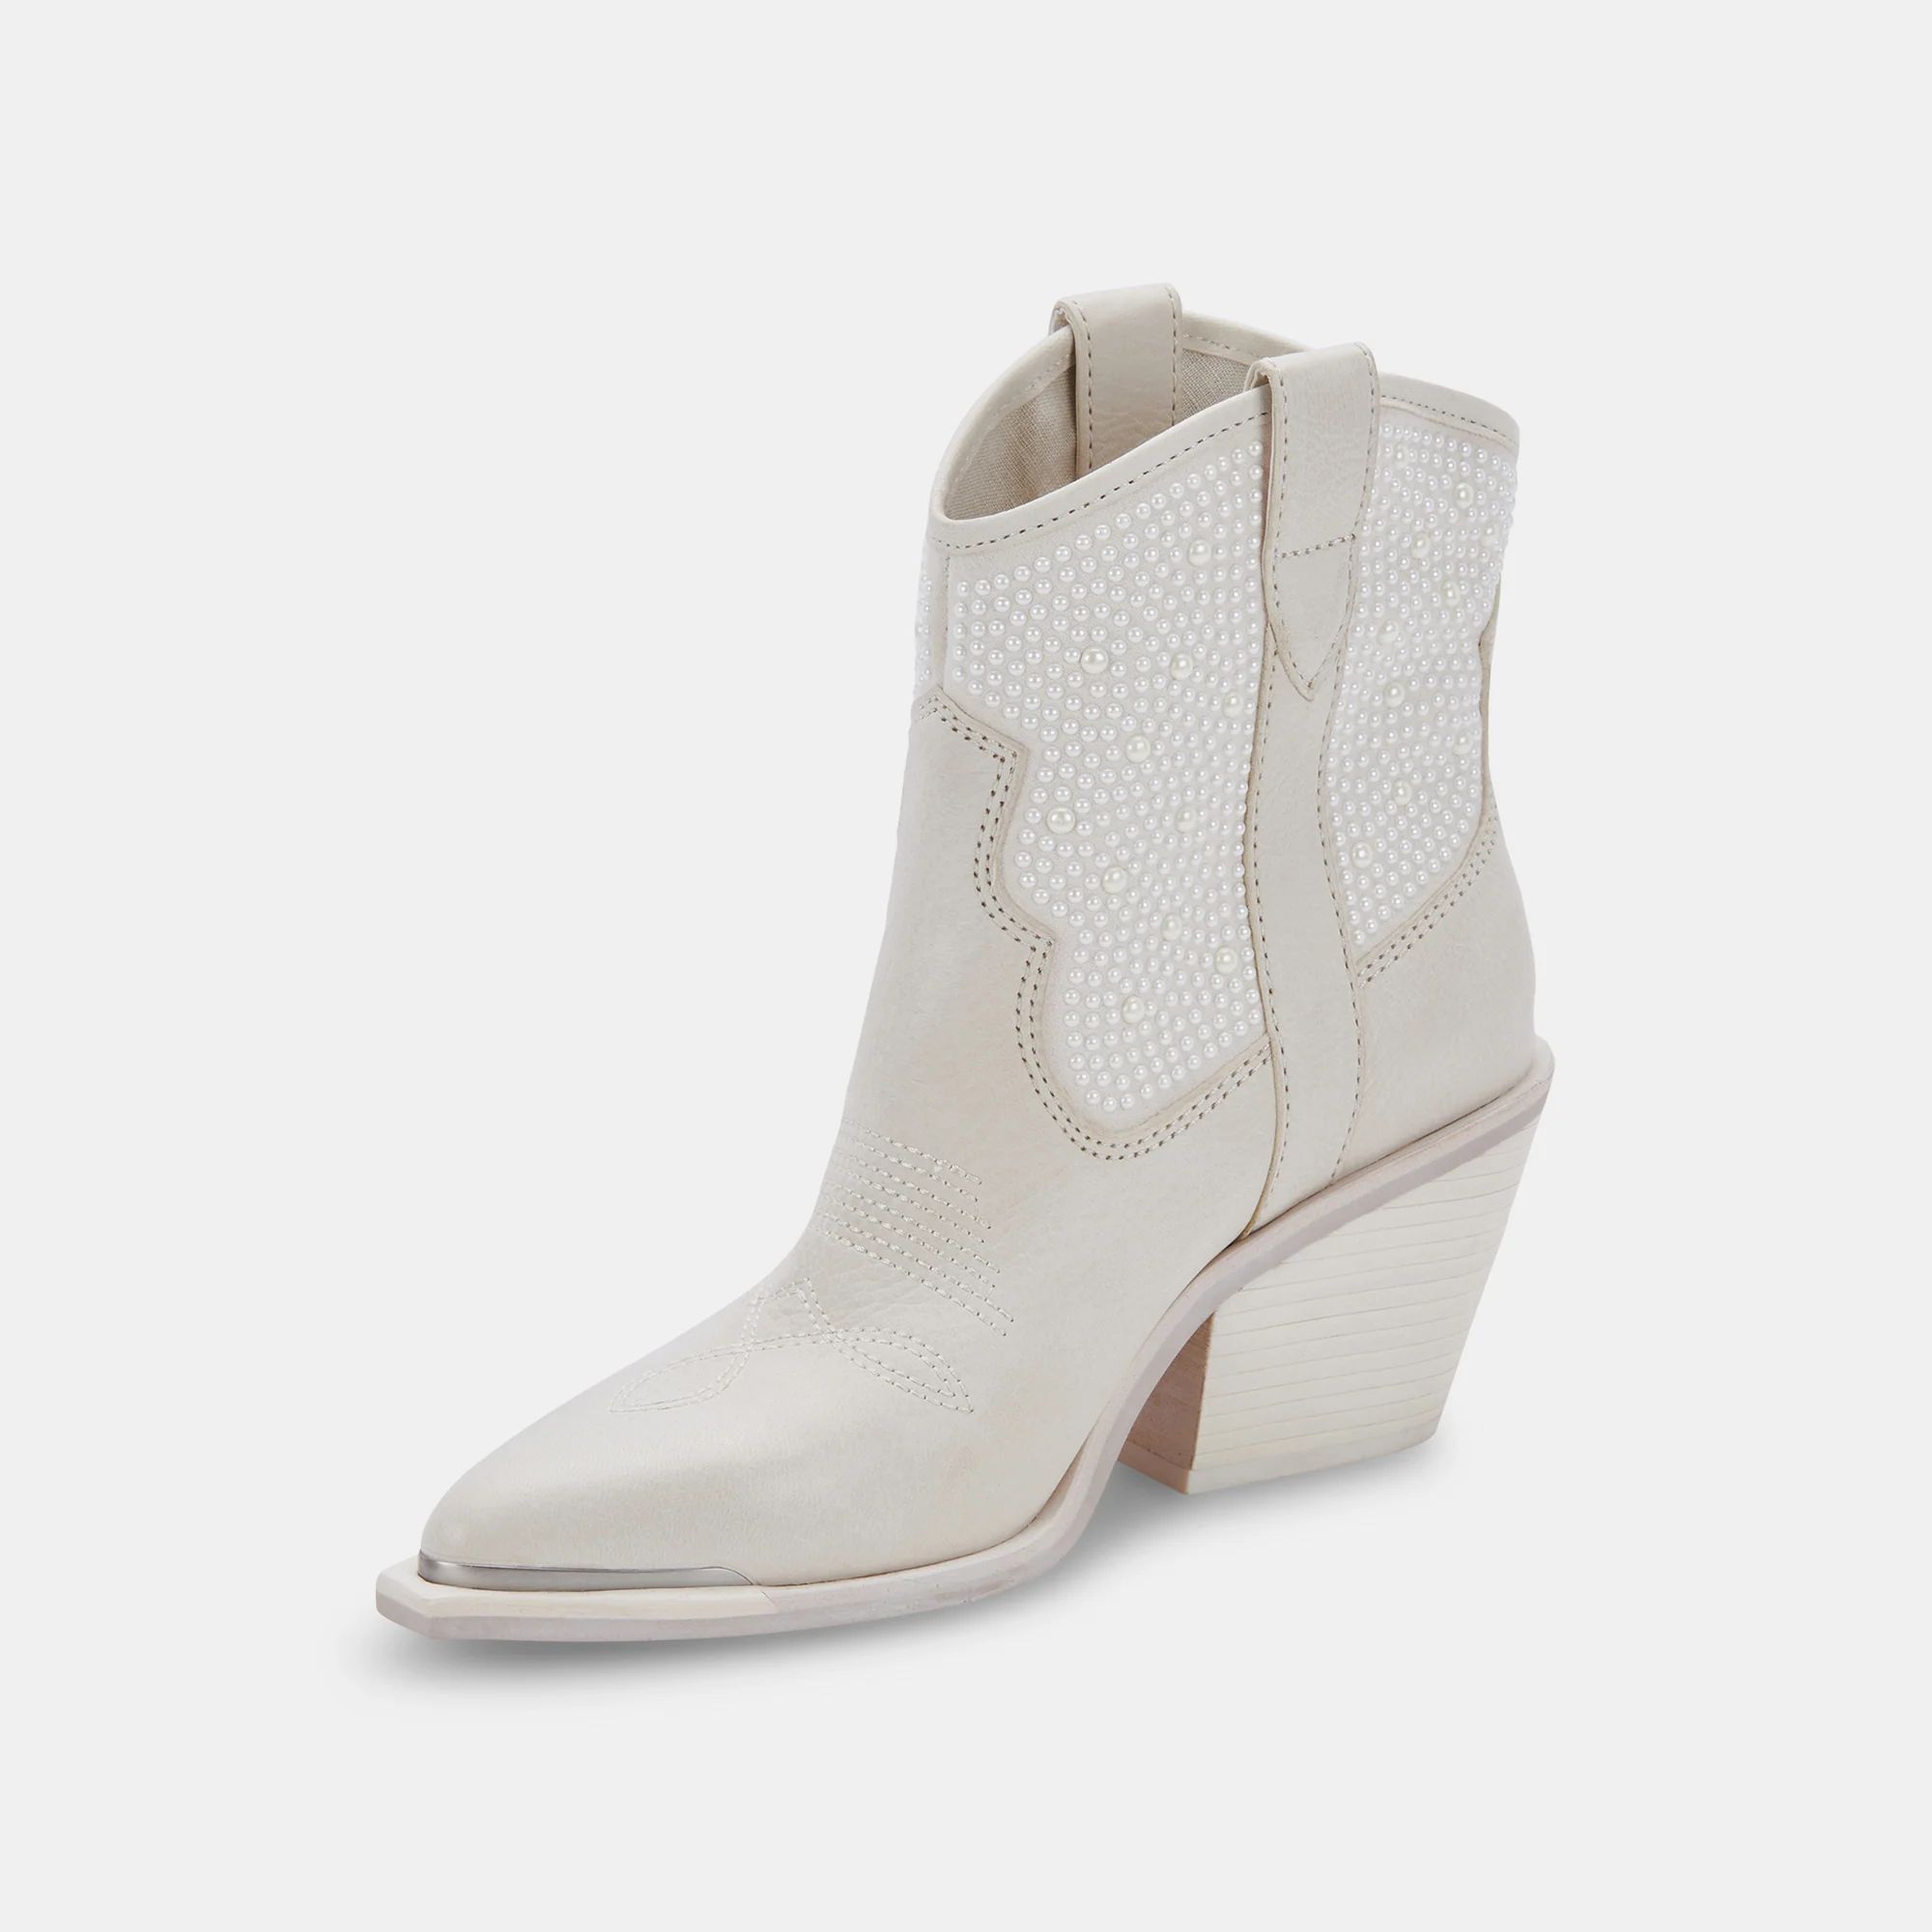 NASHE BOOTIES OFF WHITE PEARLS | DolceVita.com